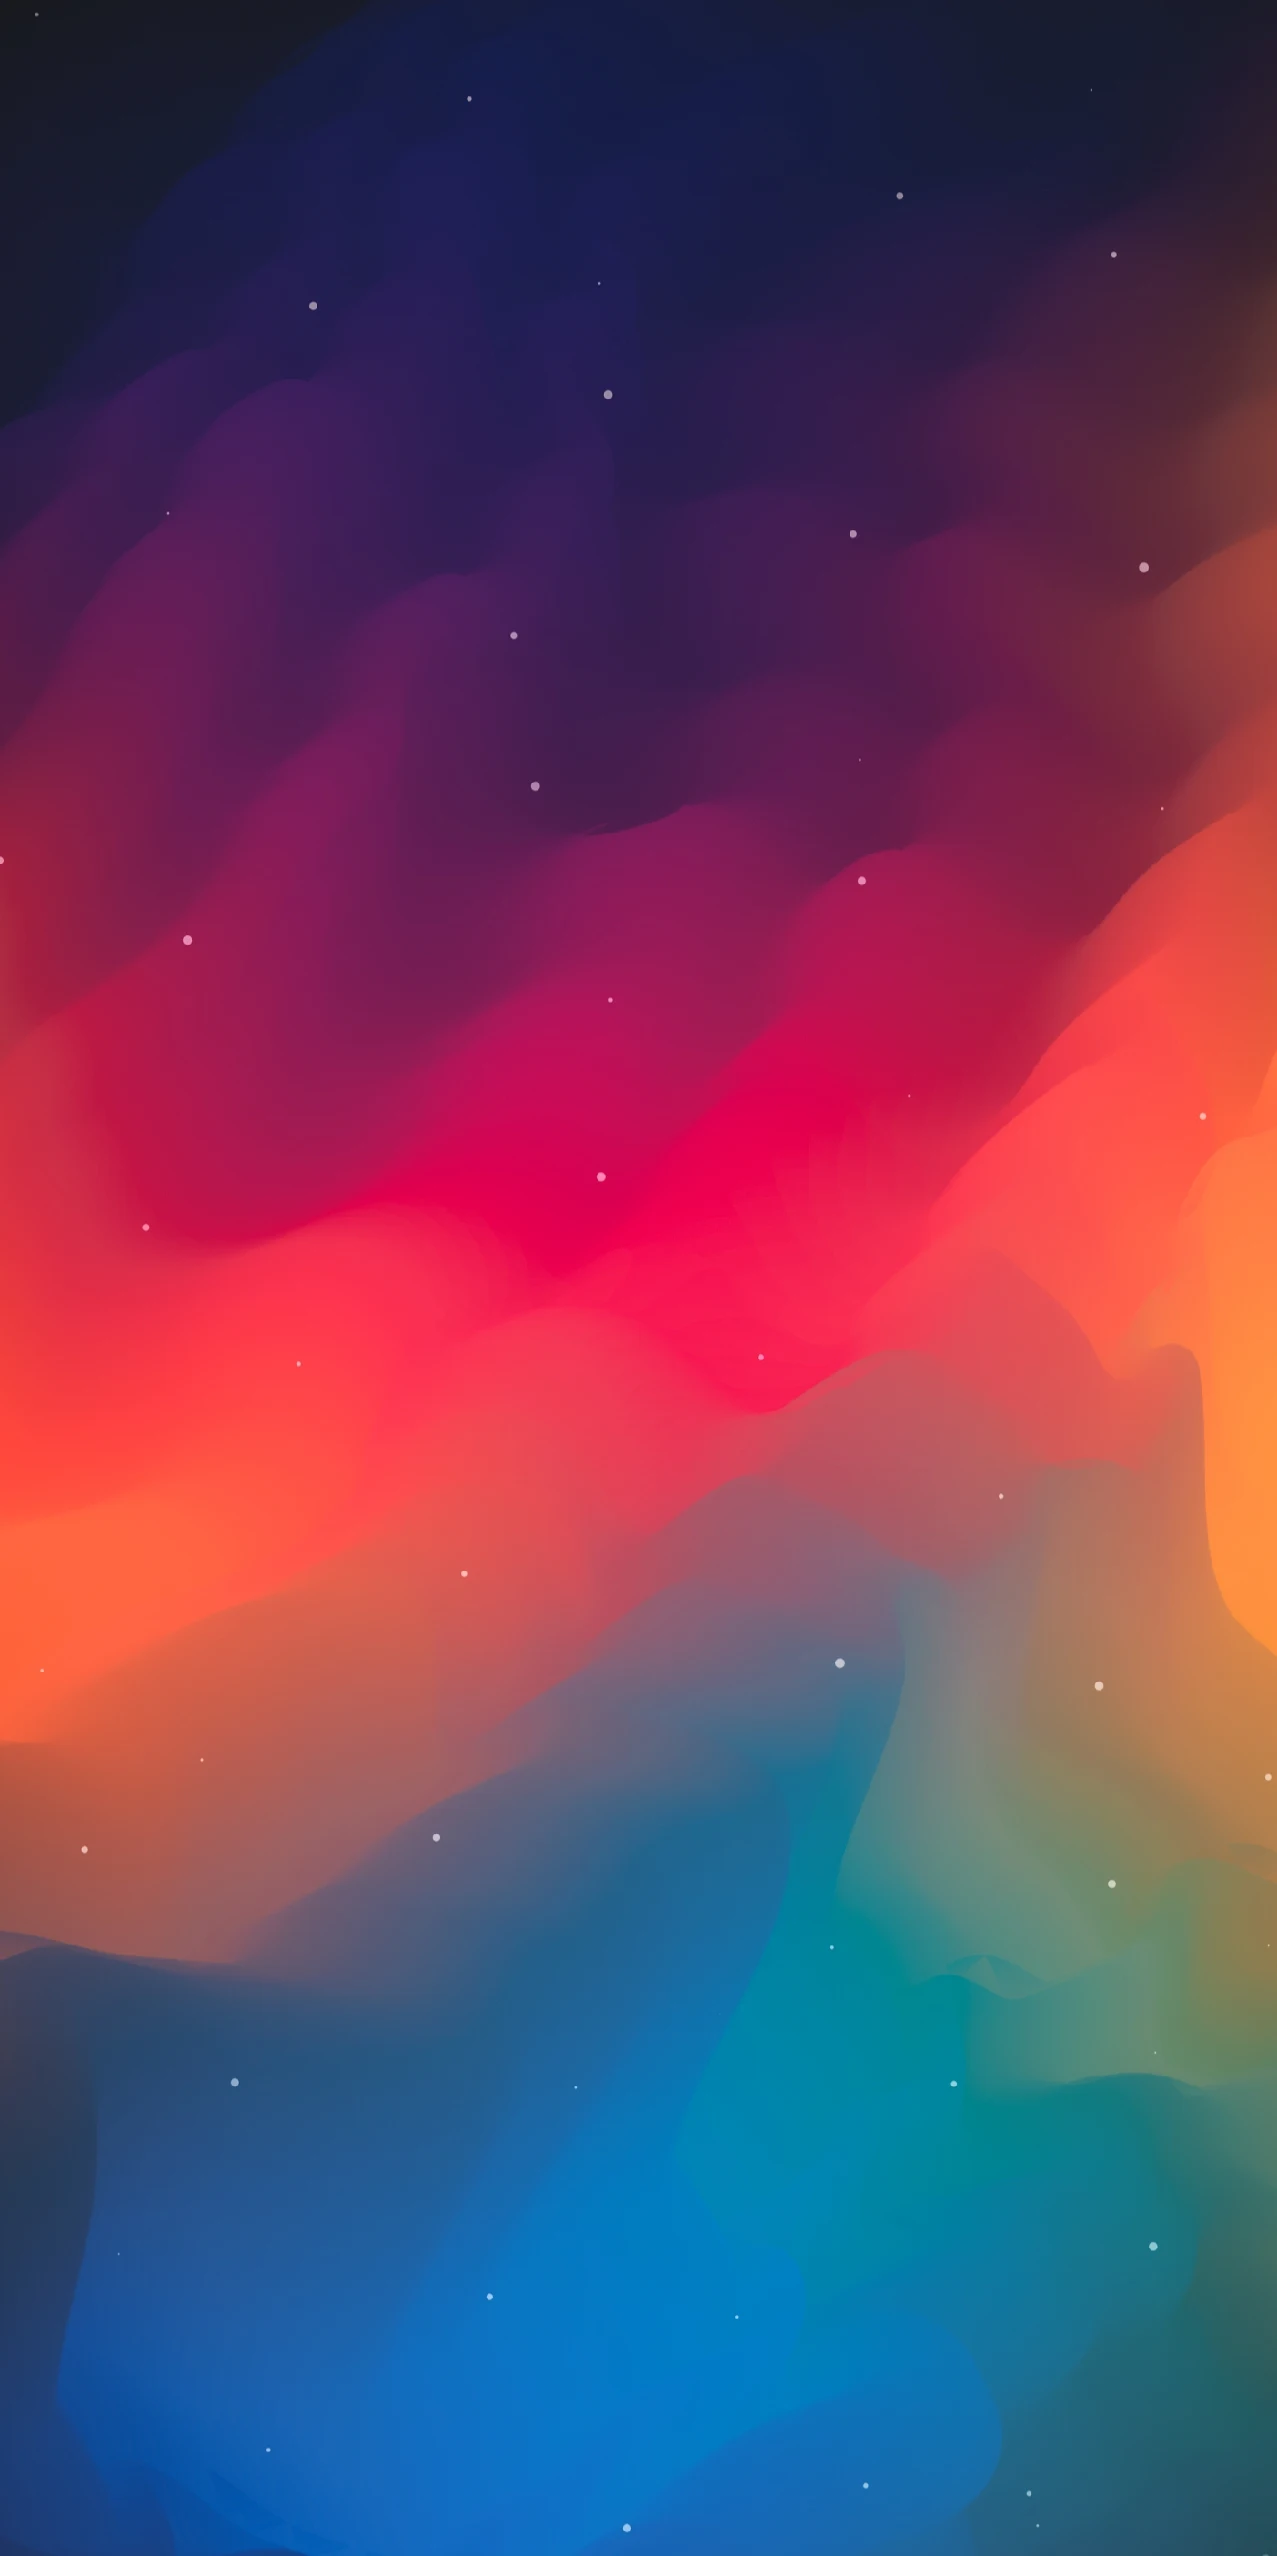 Abstract iPhone wallpaper for free HD - 048